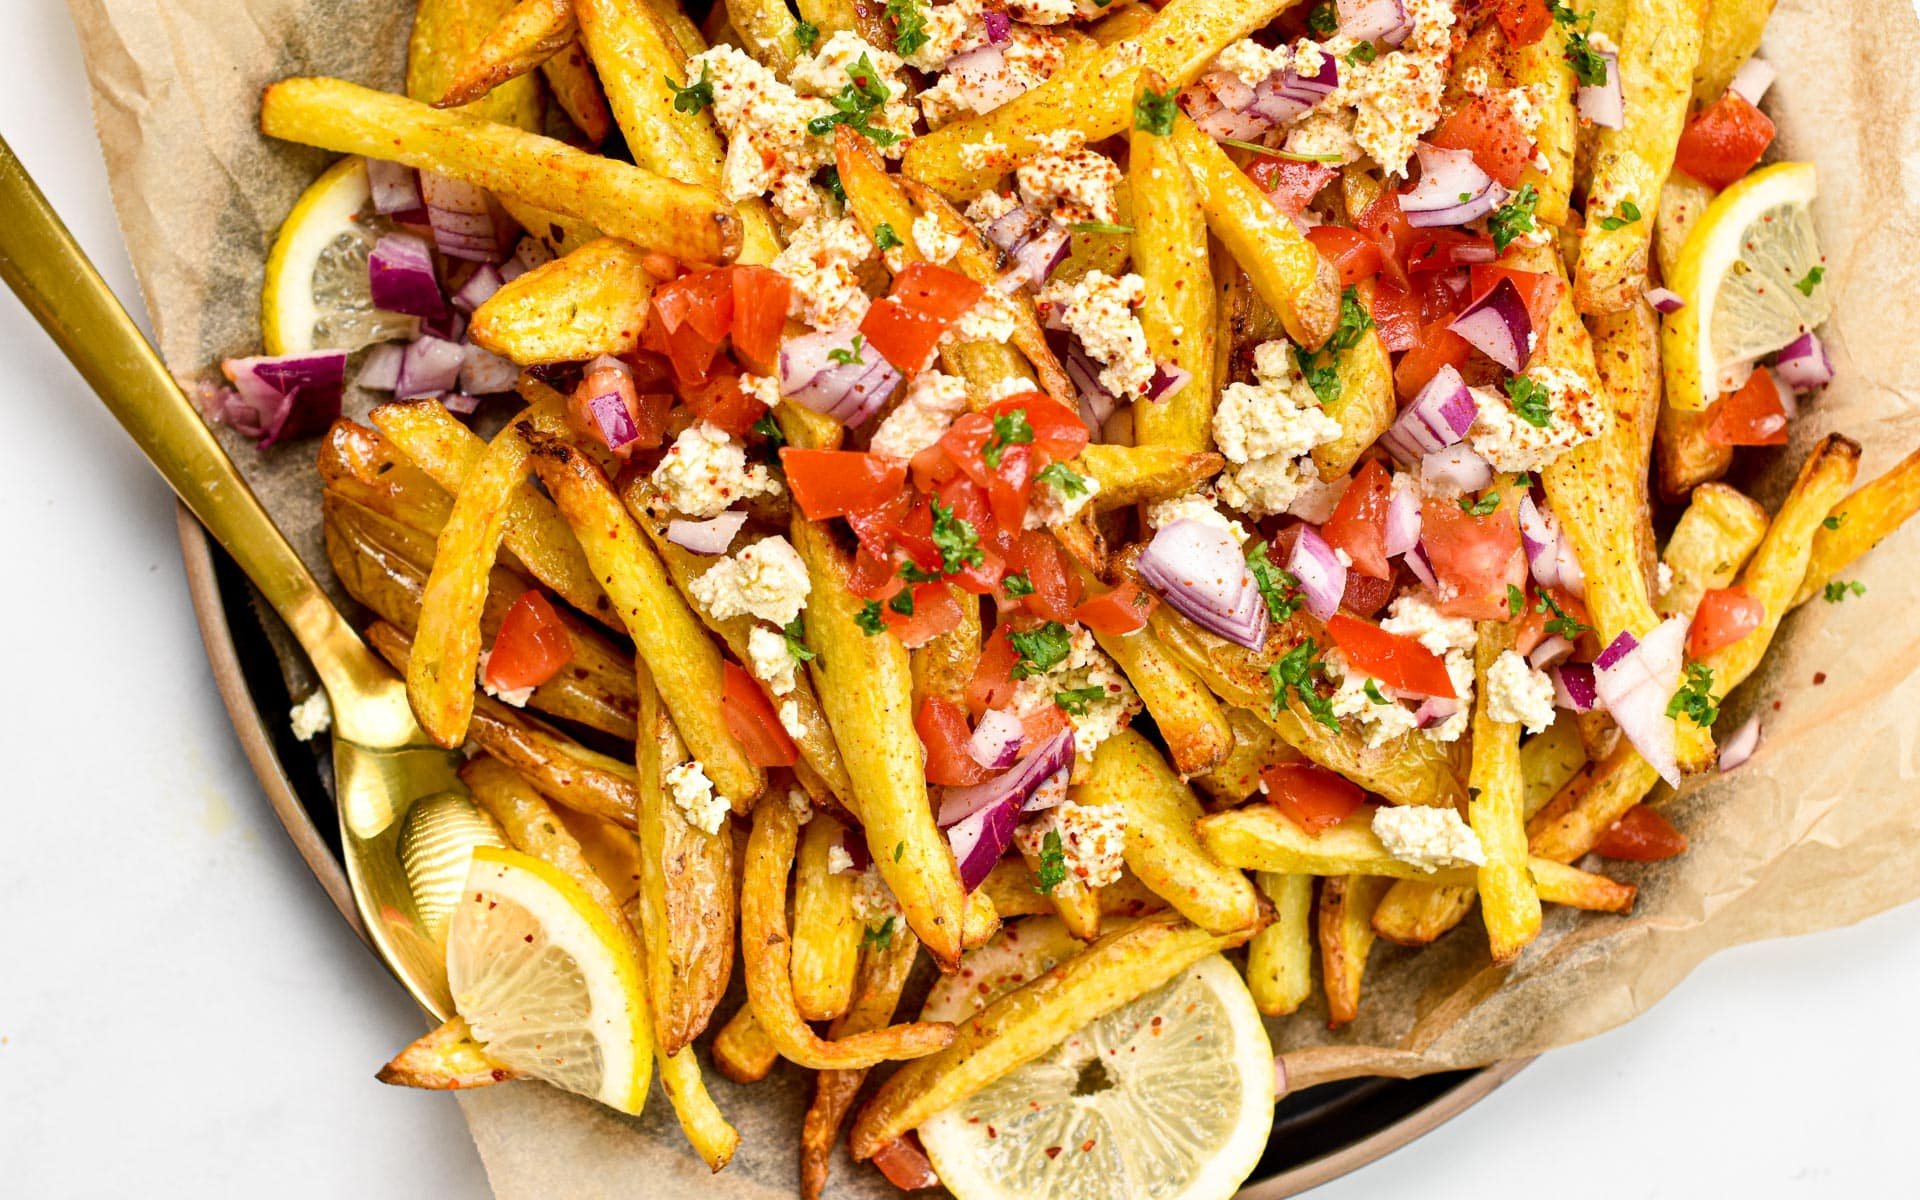 These homemade Greek Fries are crispy baked fries topped with a drizzle of lemon juice and loads of delicious Greek cuisine flavors from feta cheese, red onions, tomatoes and Parsley.